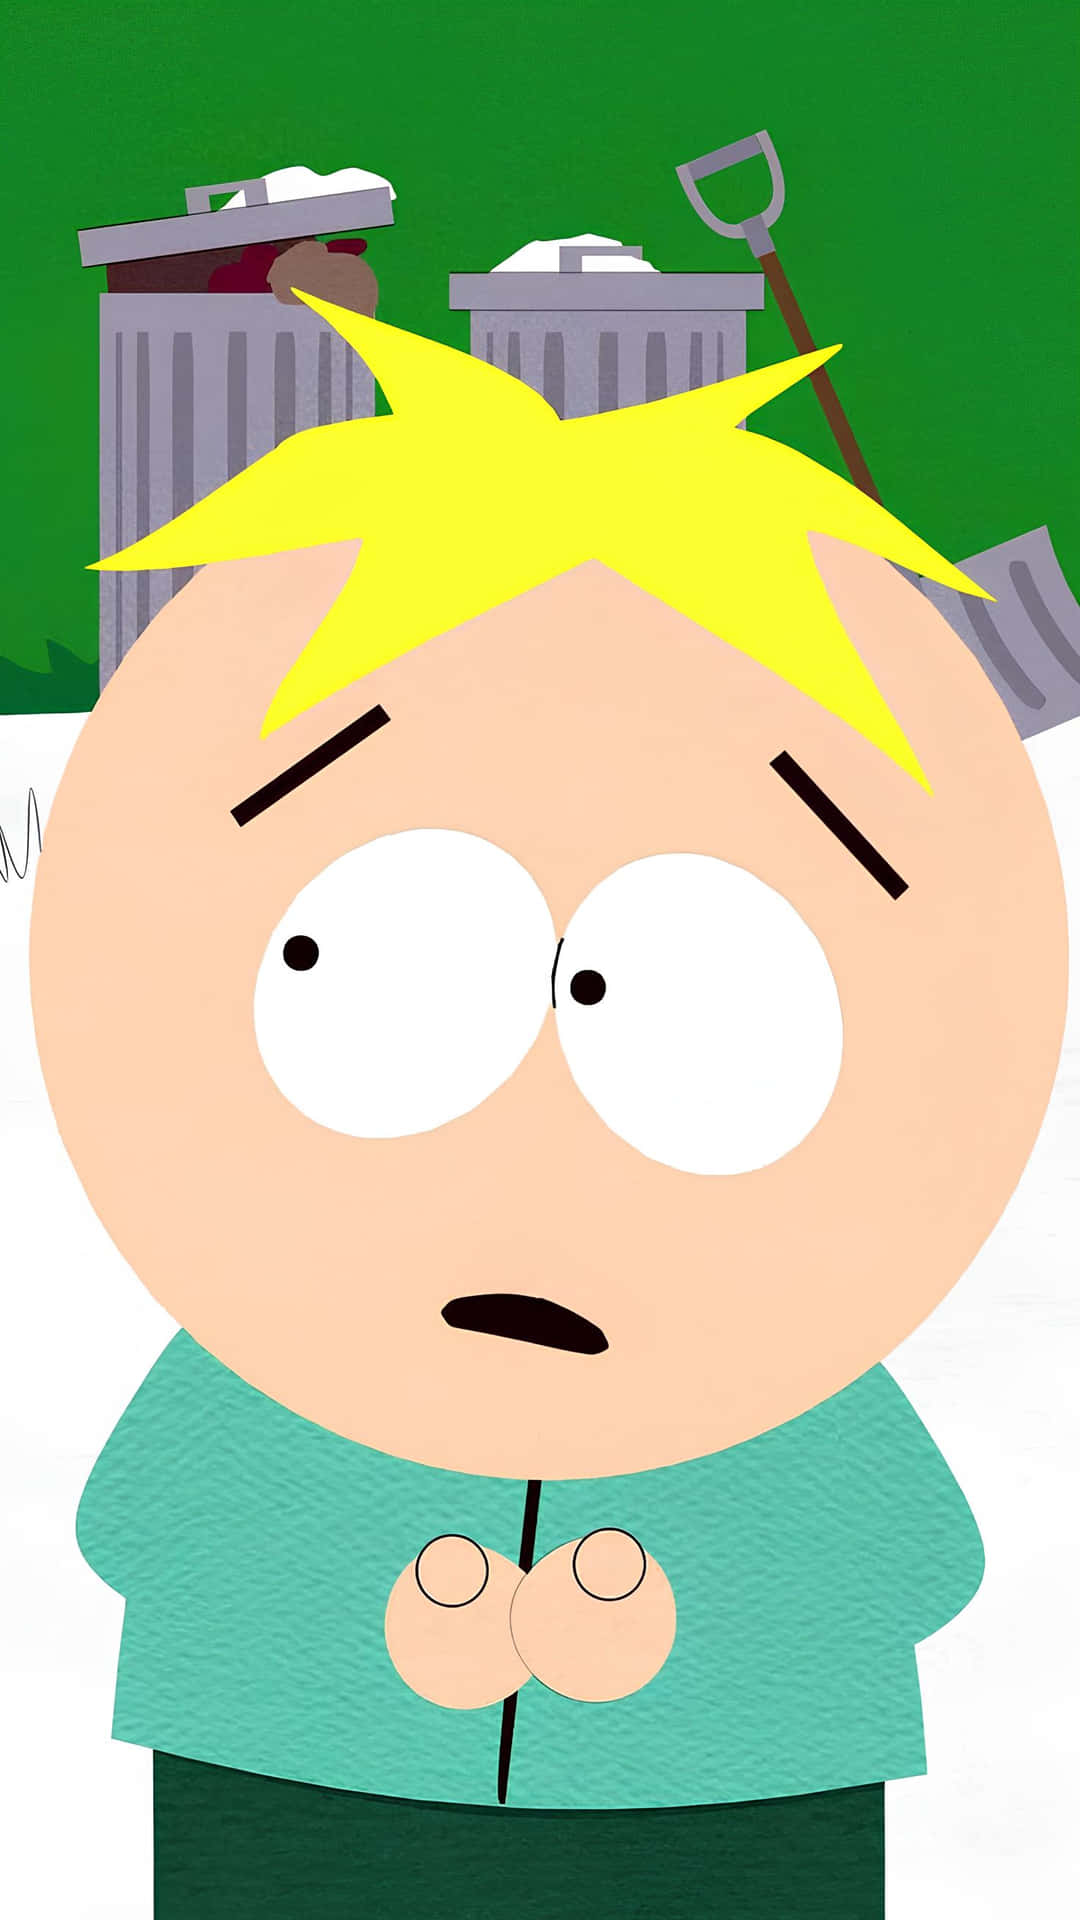 South Park Character Butters Stotch Wallpaper